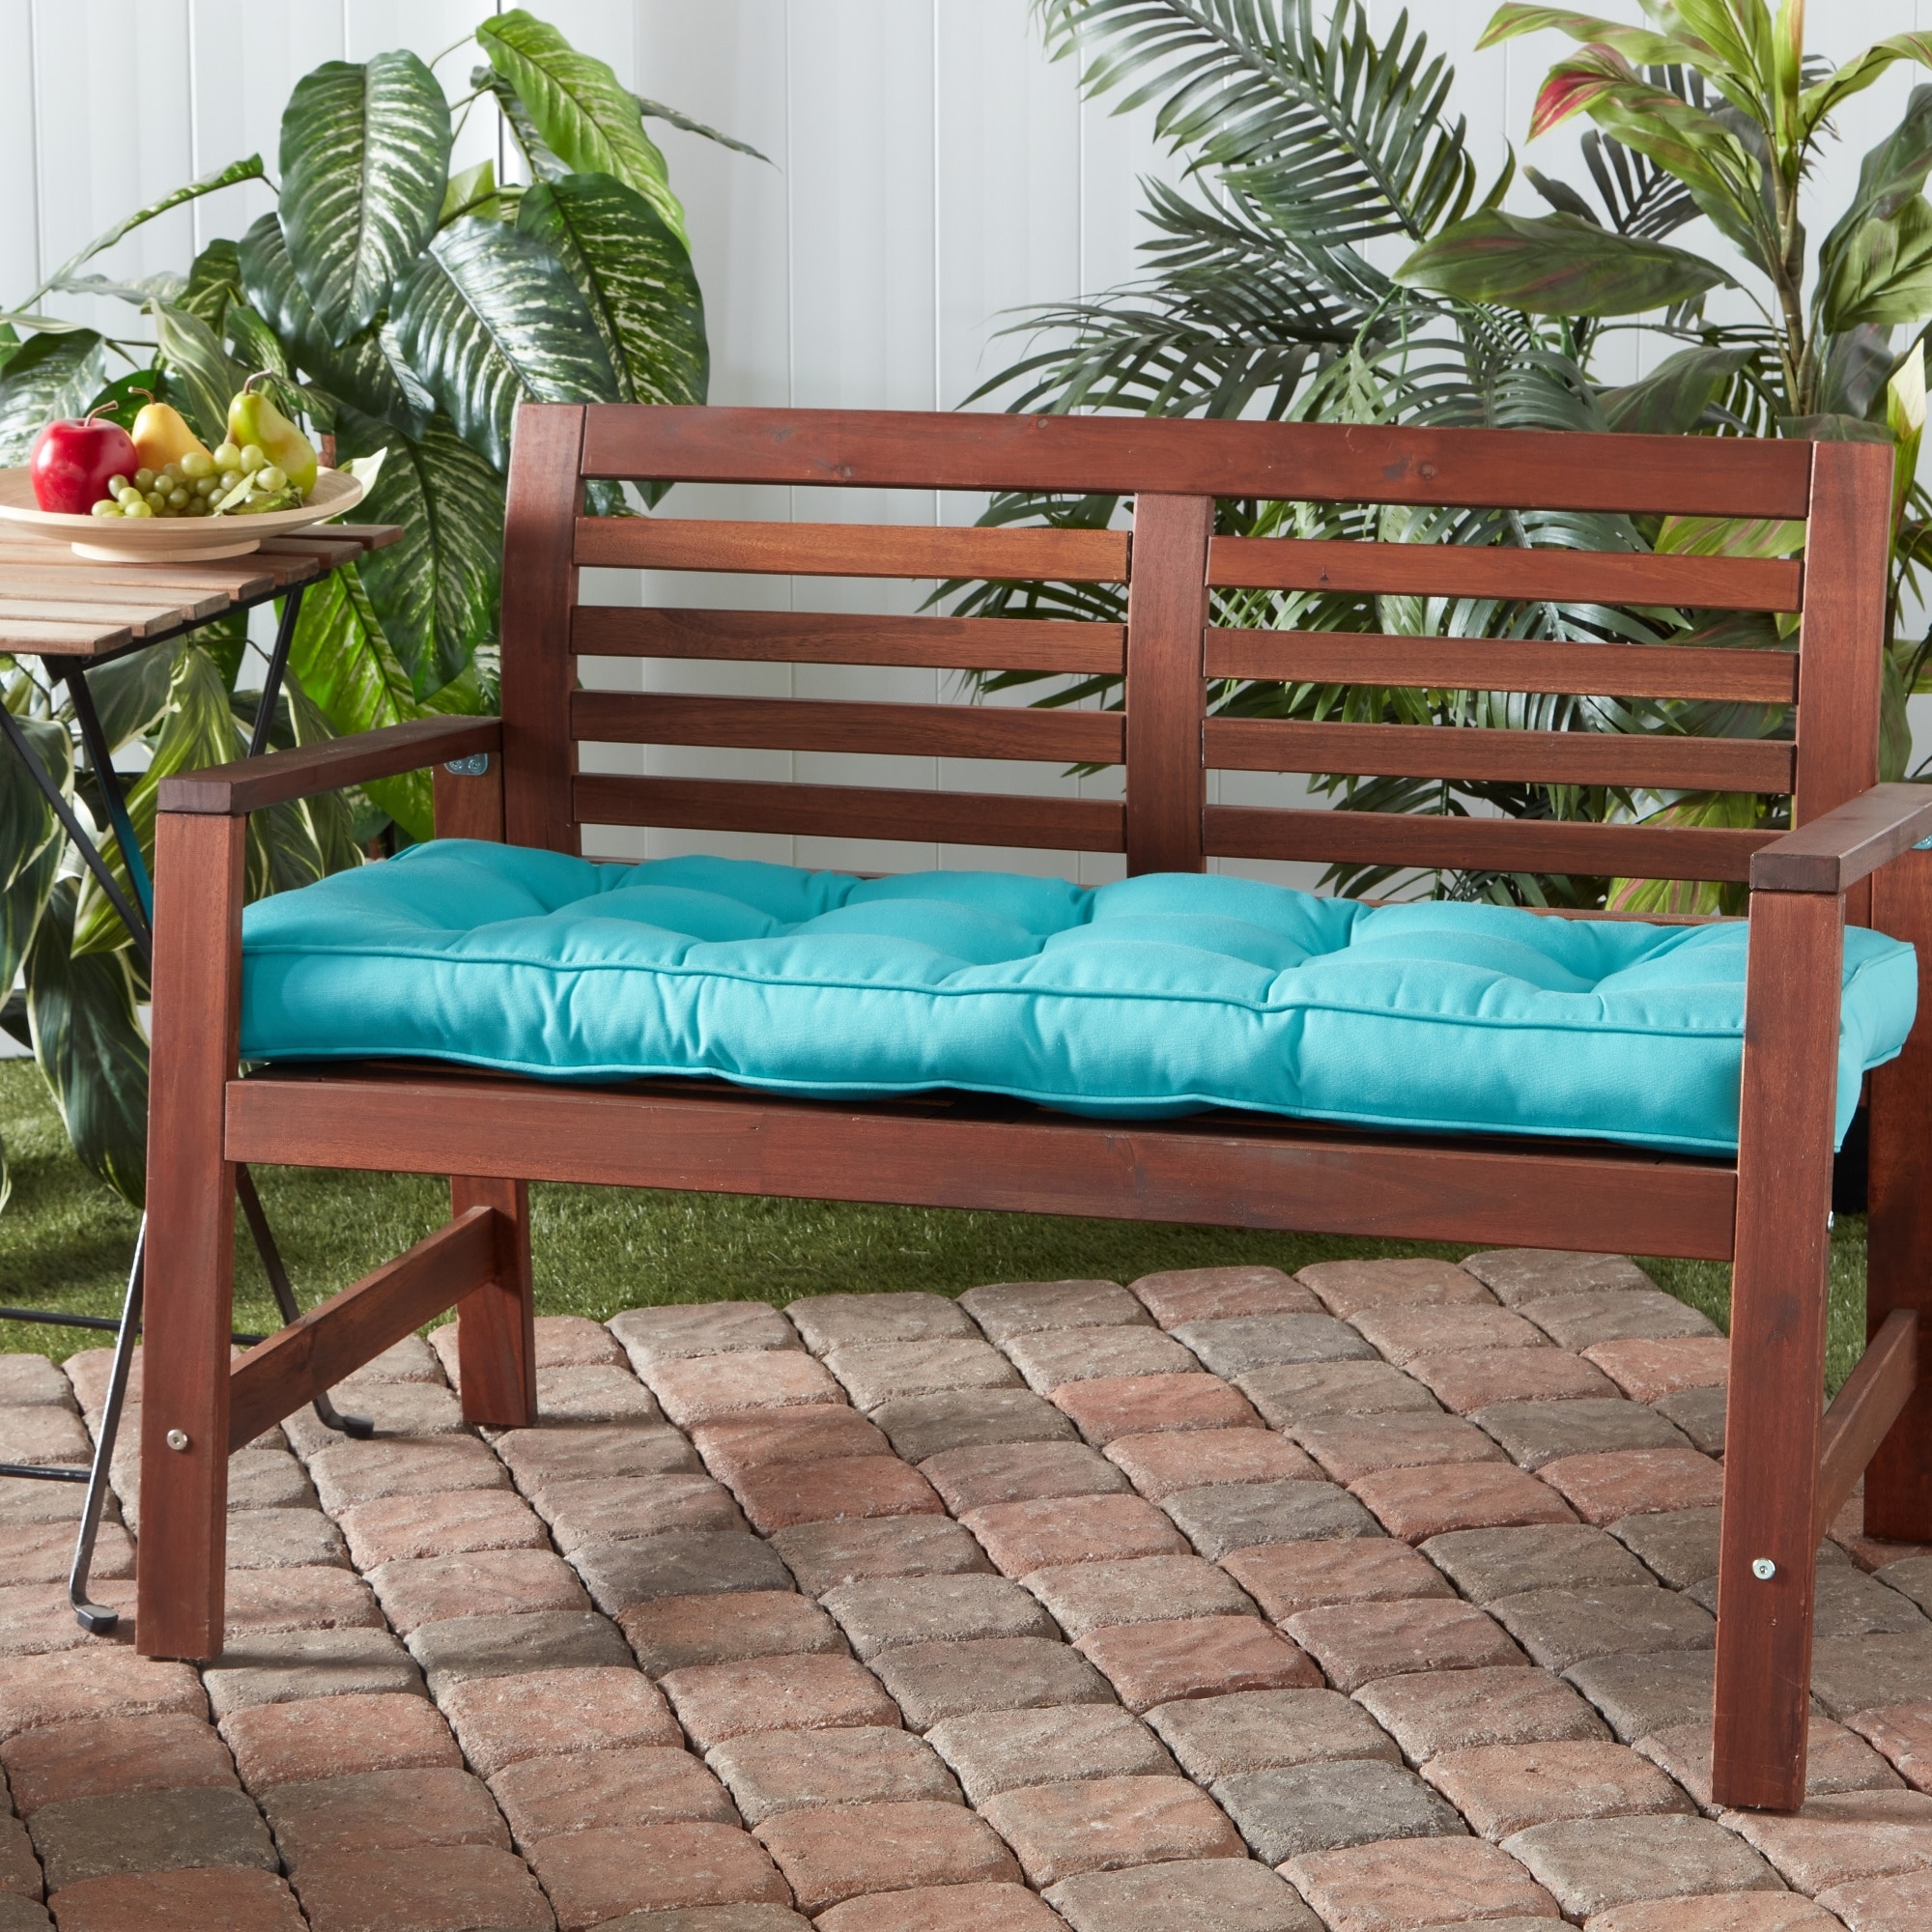 https://ak1.ostkcdn.com/images/products/is/images/direct/e4cacaf2bc6810fd5052ed43b6bae4a4105e3359/Sunbrella-Fabric-51-in.-Outdoor-Bench-Cushion.jpg